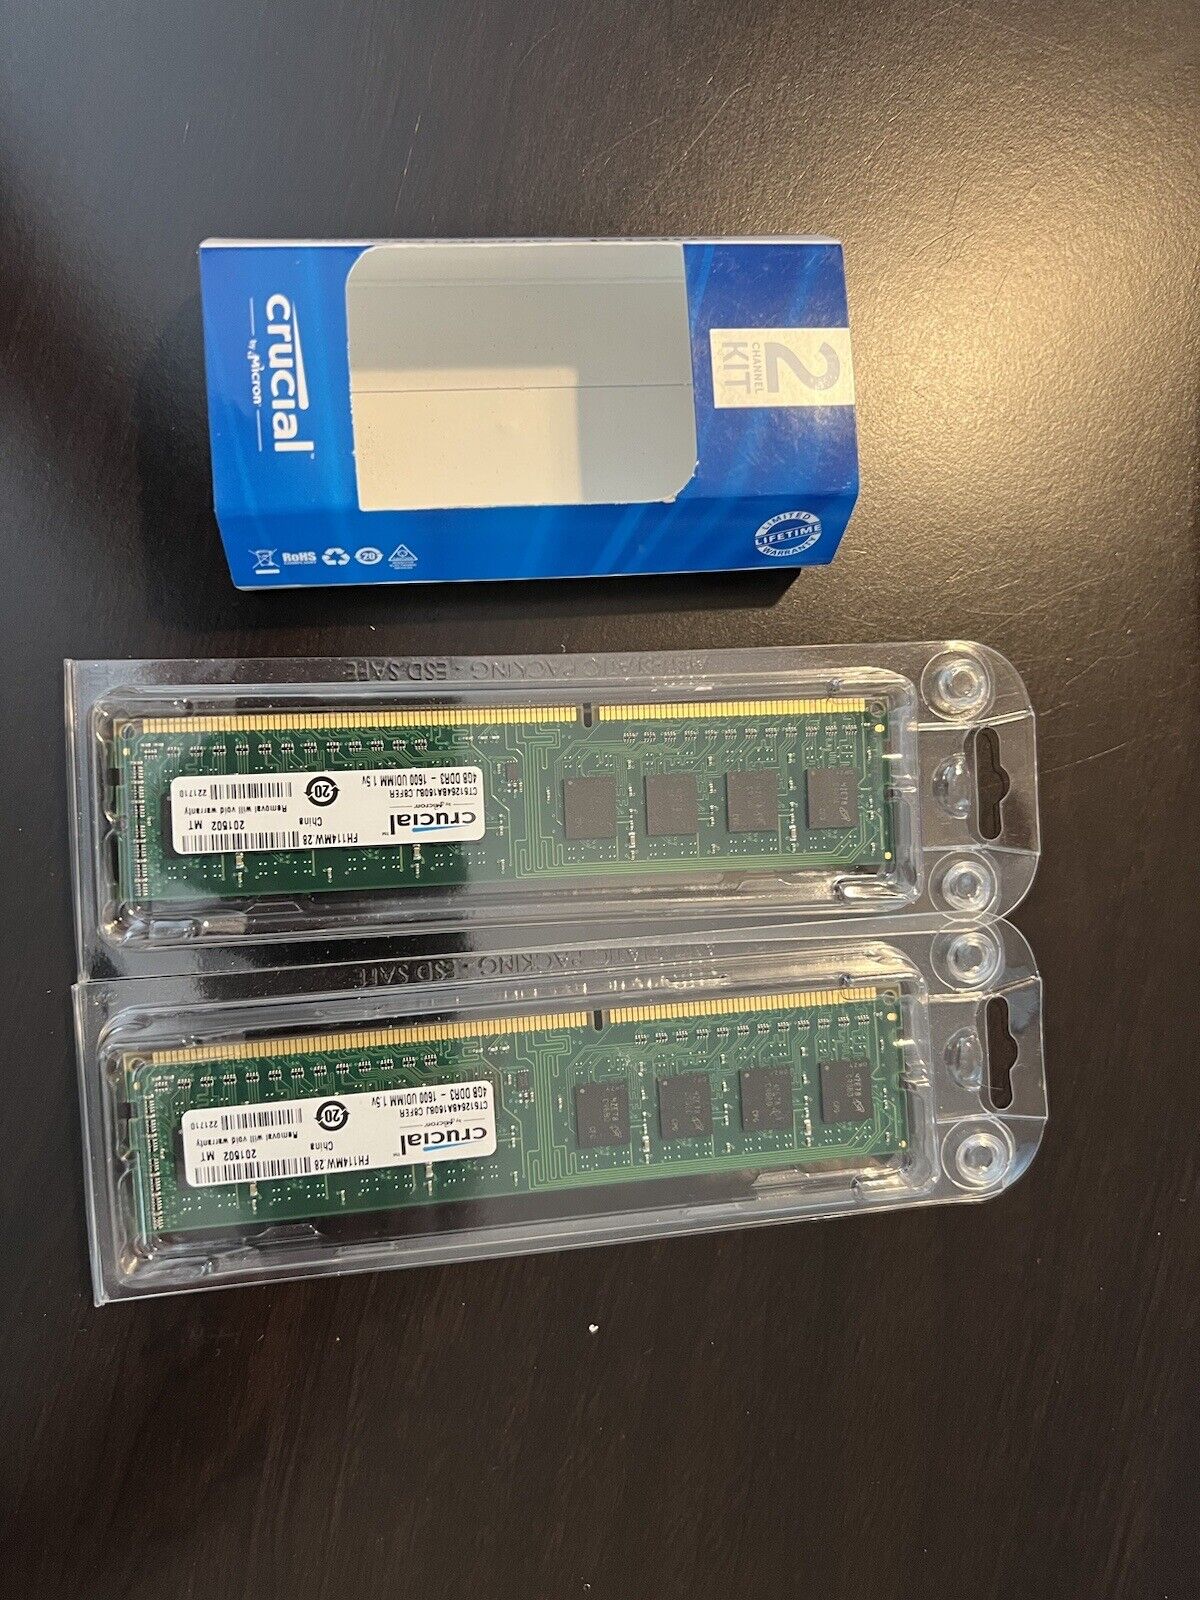 Crucial by Micron CRM-6108 Rev C - 2 Channel Kit Memory